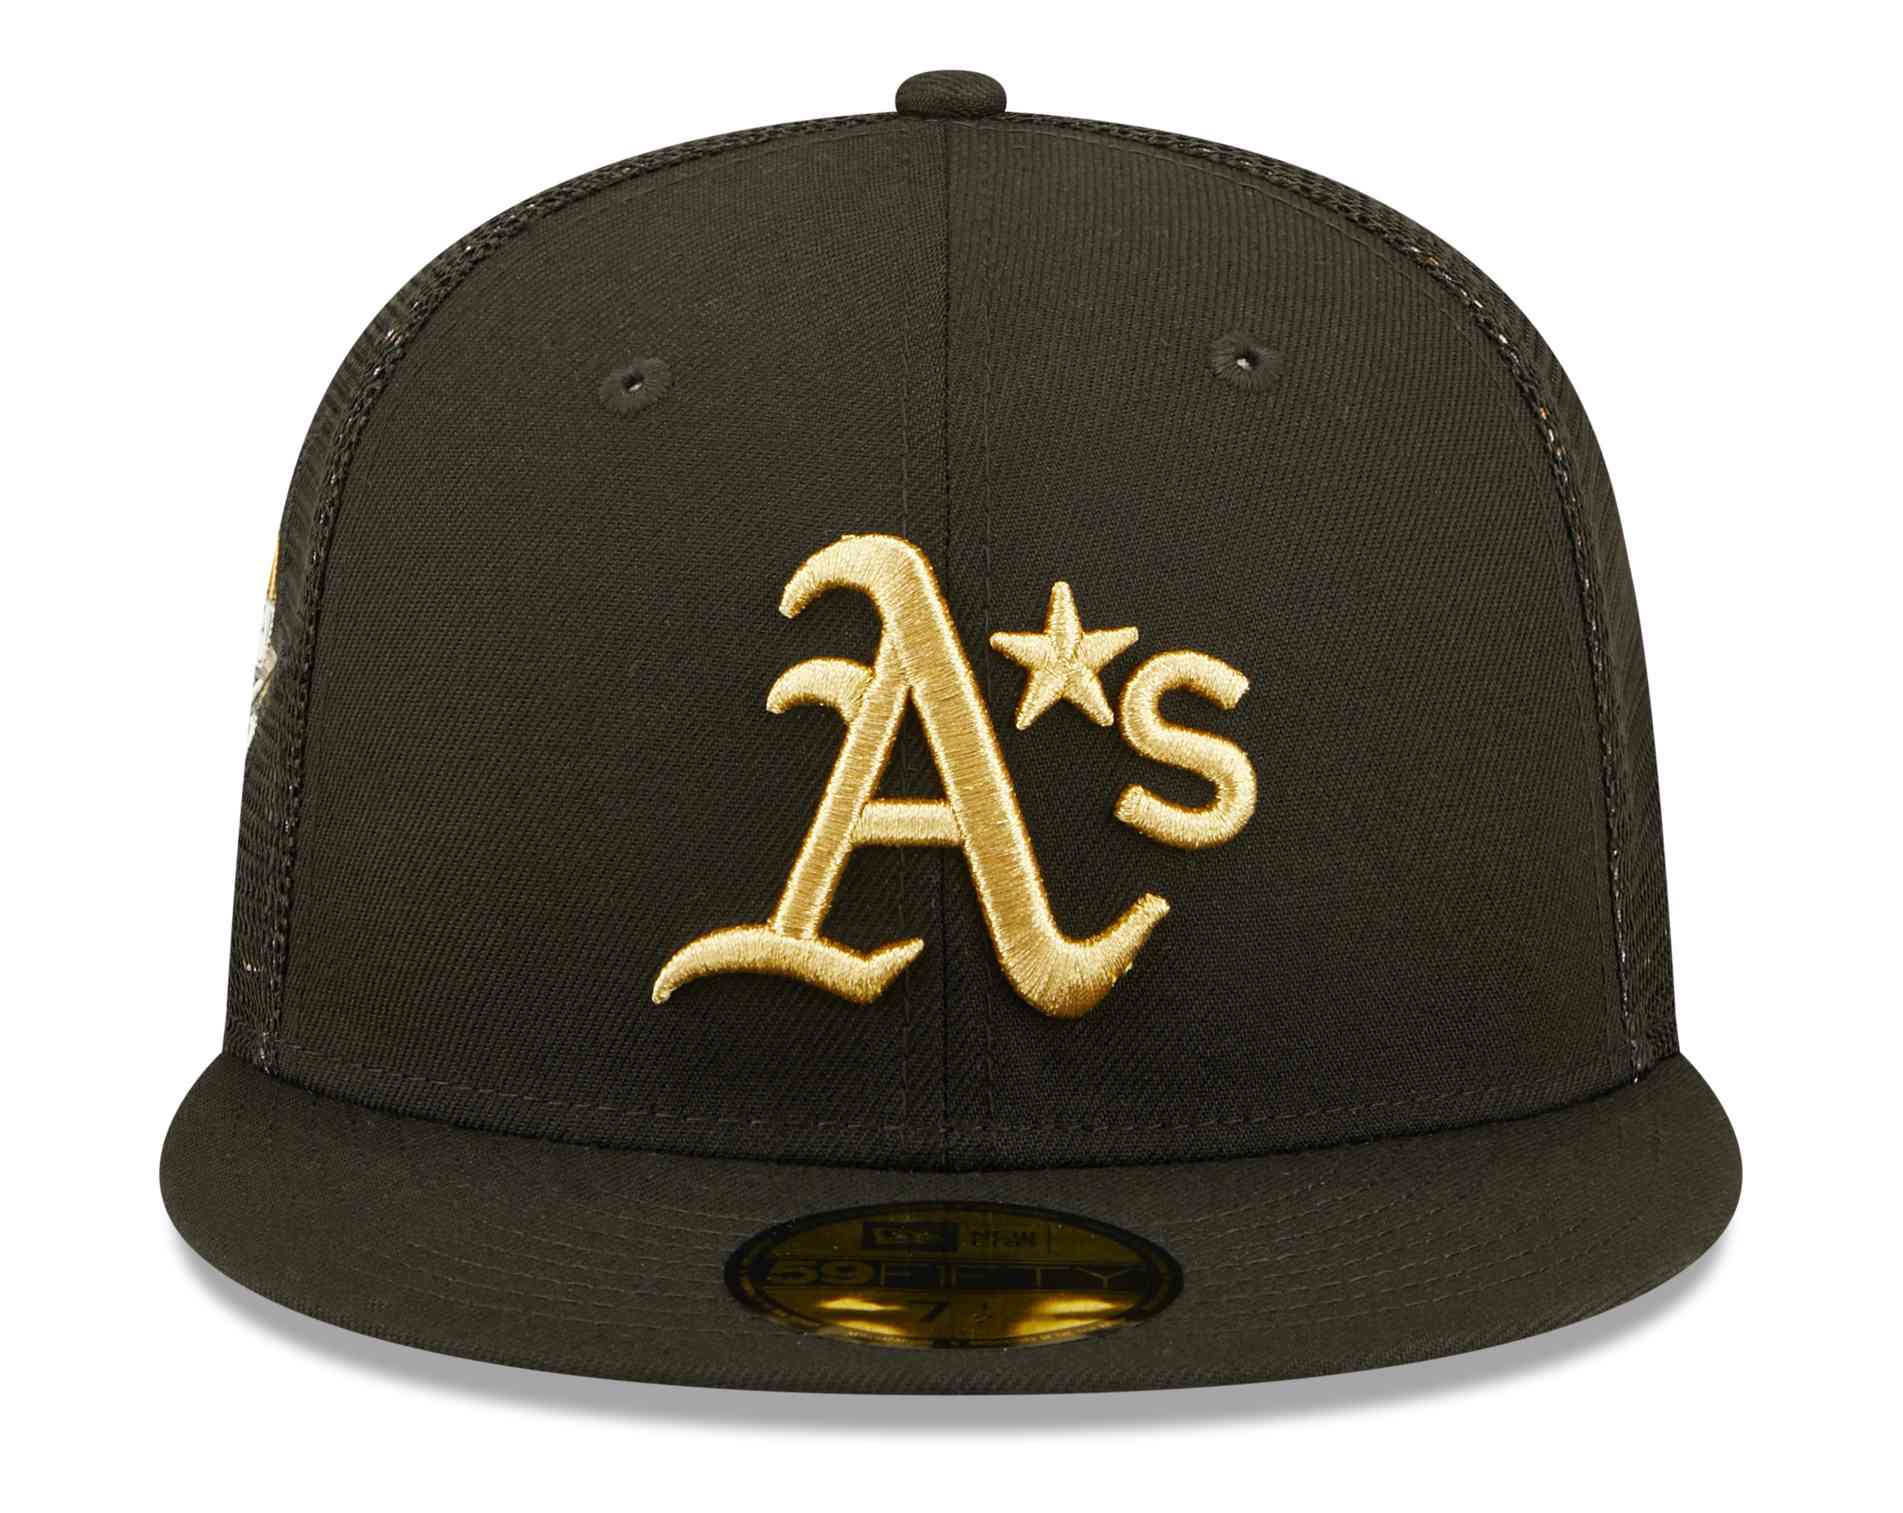 New Era - MLB Oakland Athletics All Star Game Patch 59Fifty Fitted Cap